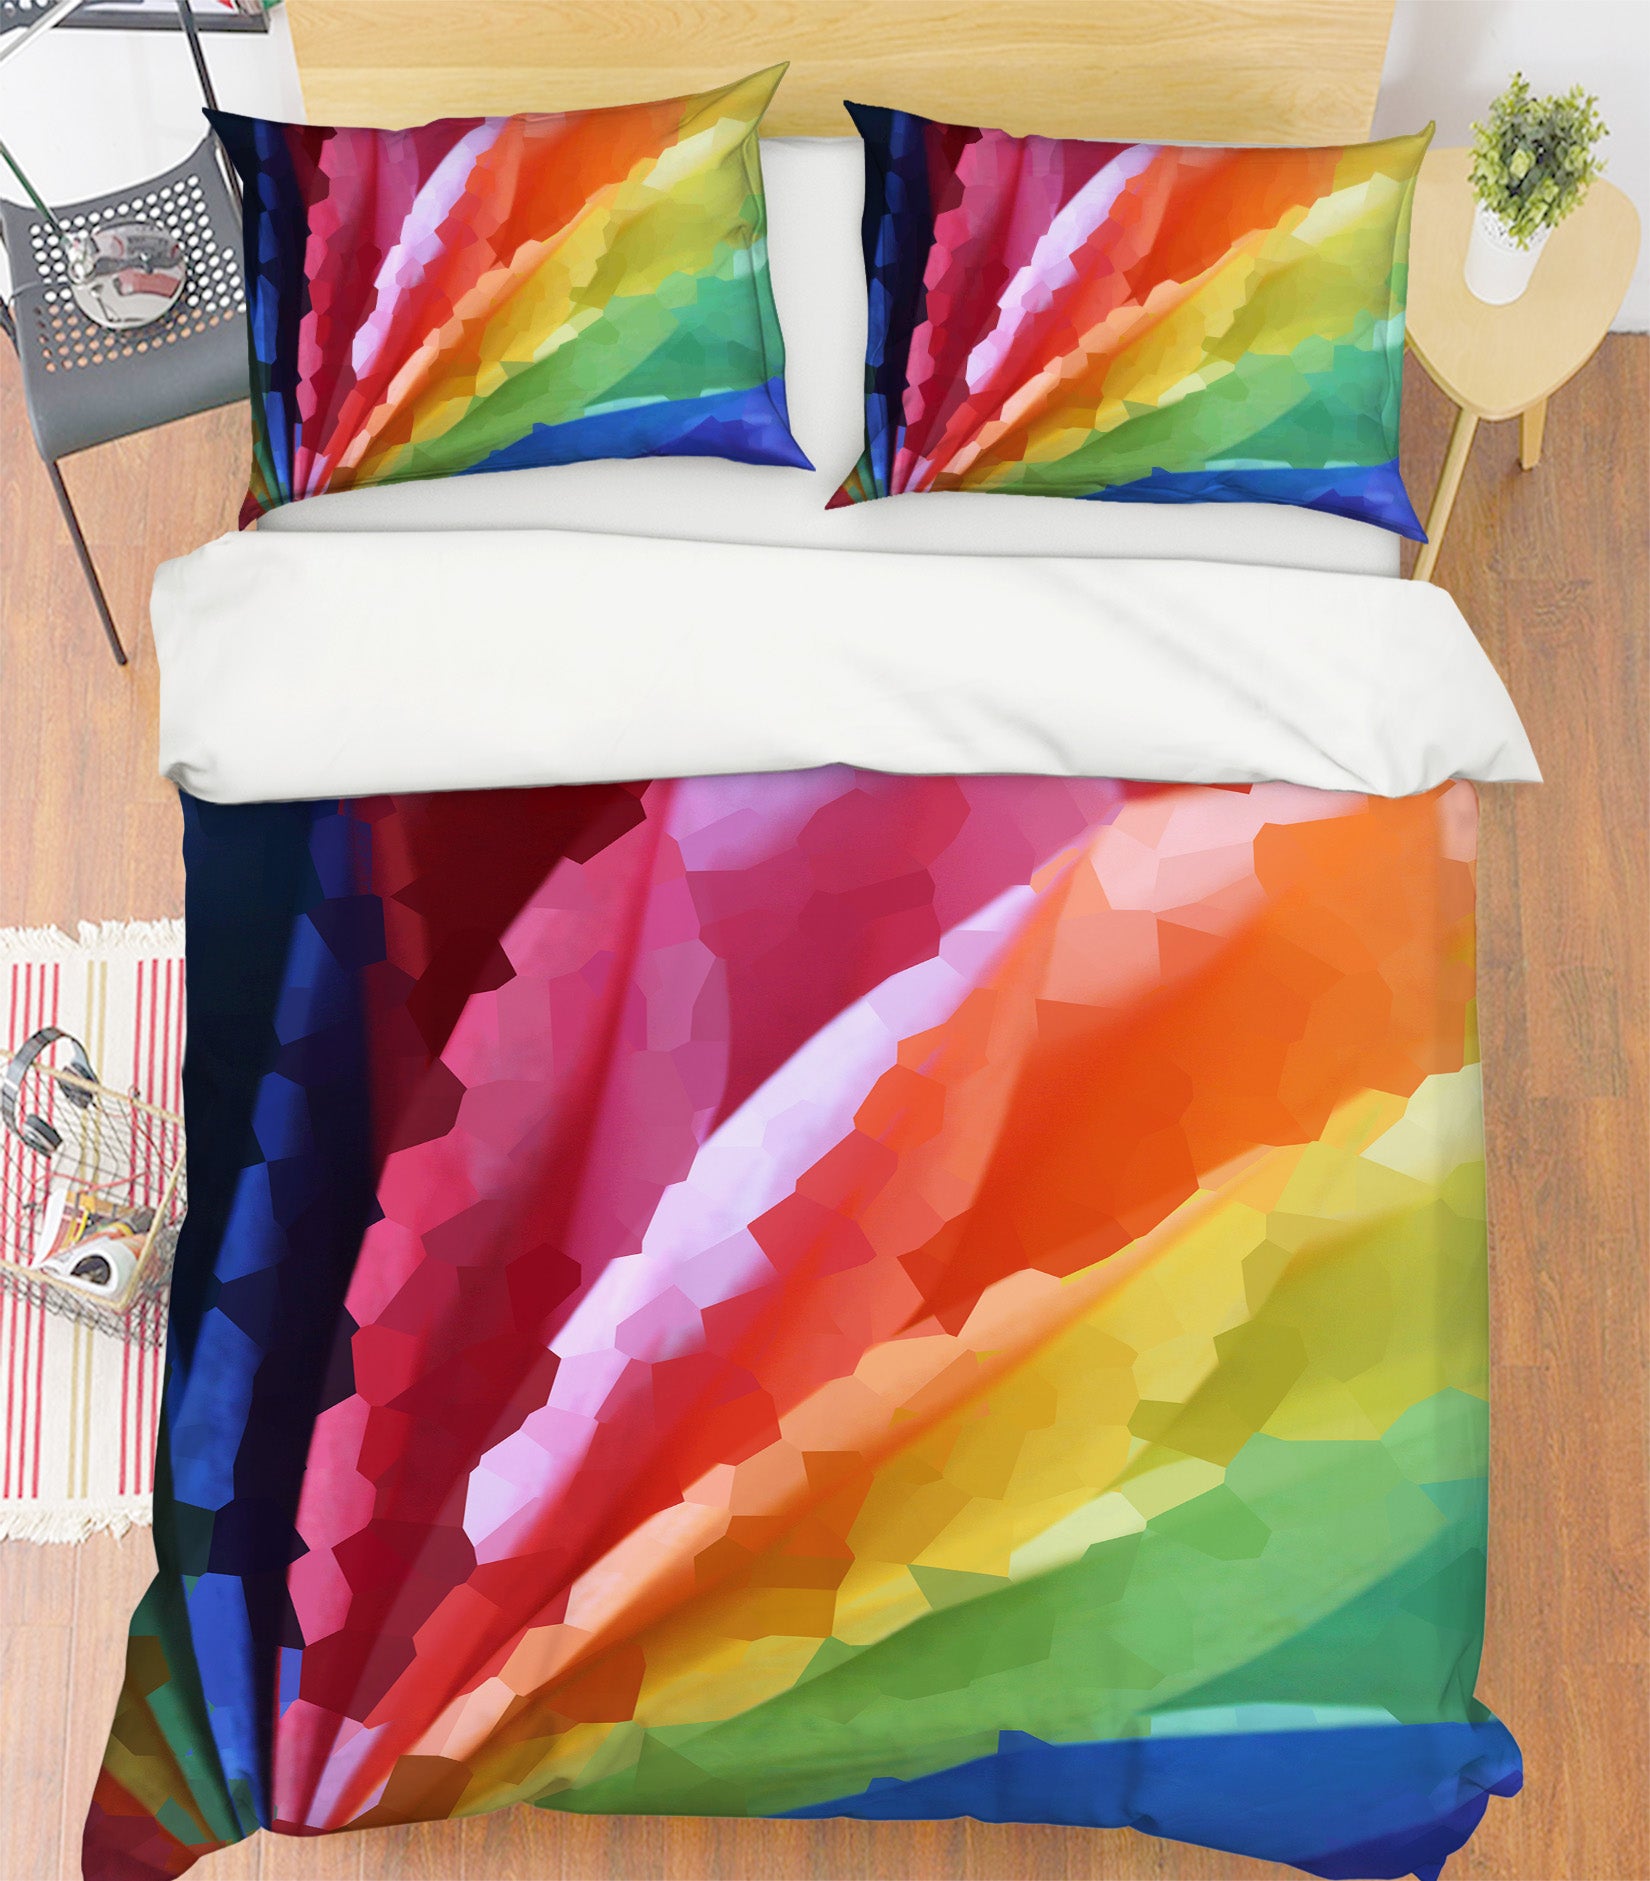 3D Colored Feathers 19142 Shandra Smith Bedding Bed Pillowcases Quilt